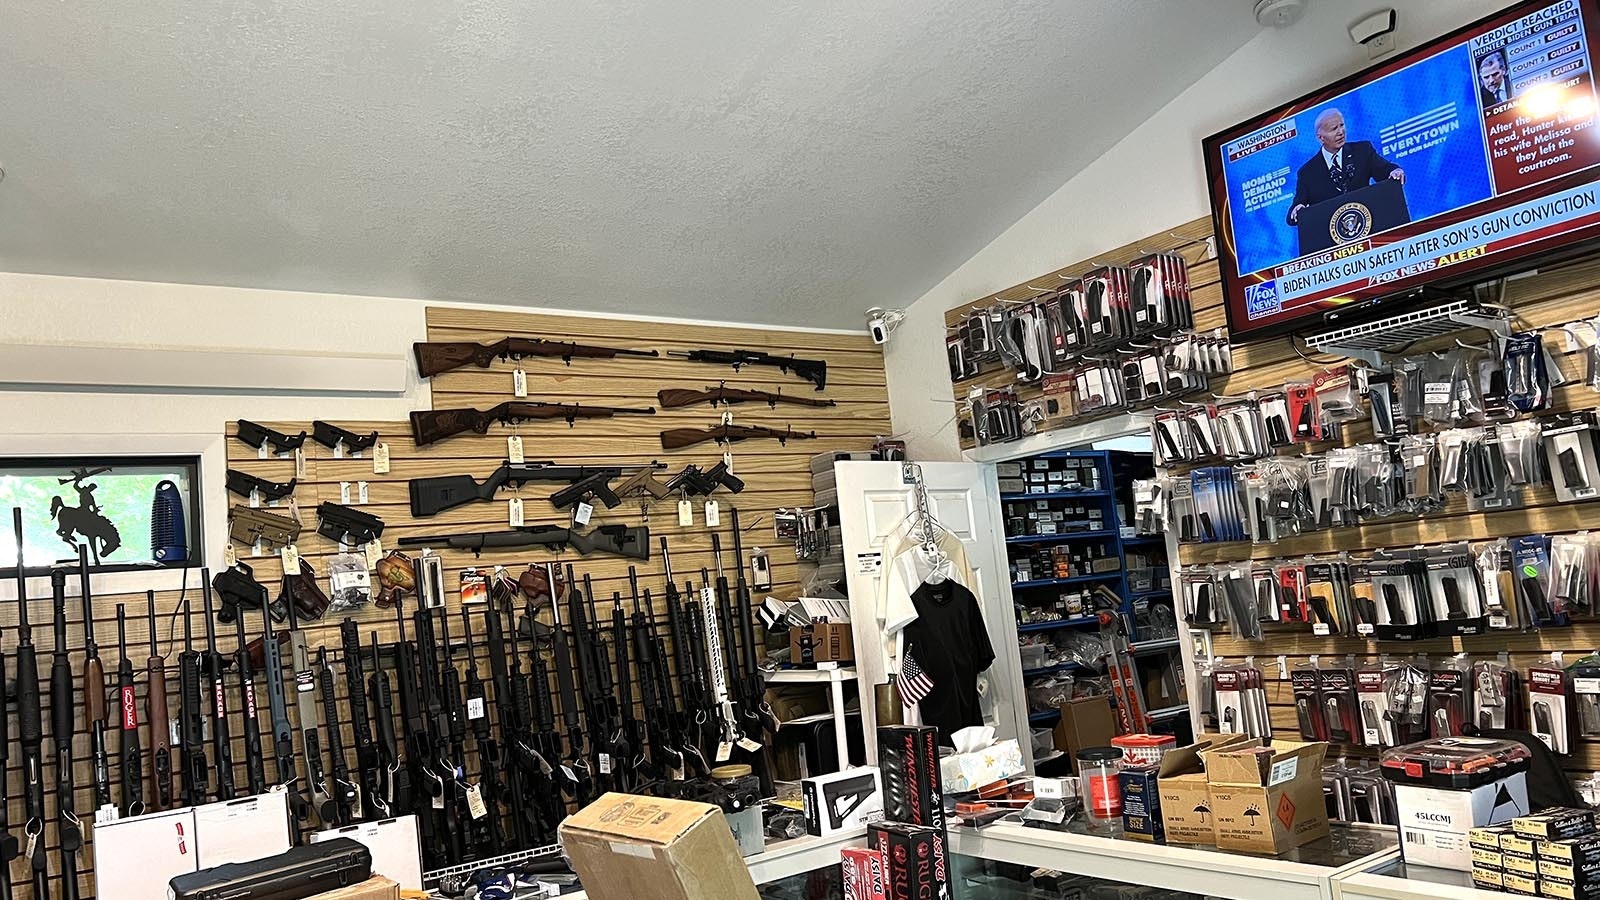 A television in the Dave’s Guns shop in Larmie broadcasts President Joe Biden speaking at a gun control rally on Tuesday, the same day his son, Hunter Biden, was convicted for gun-related felonies.